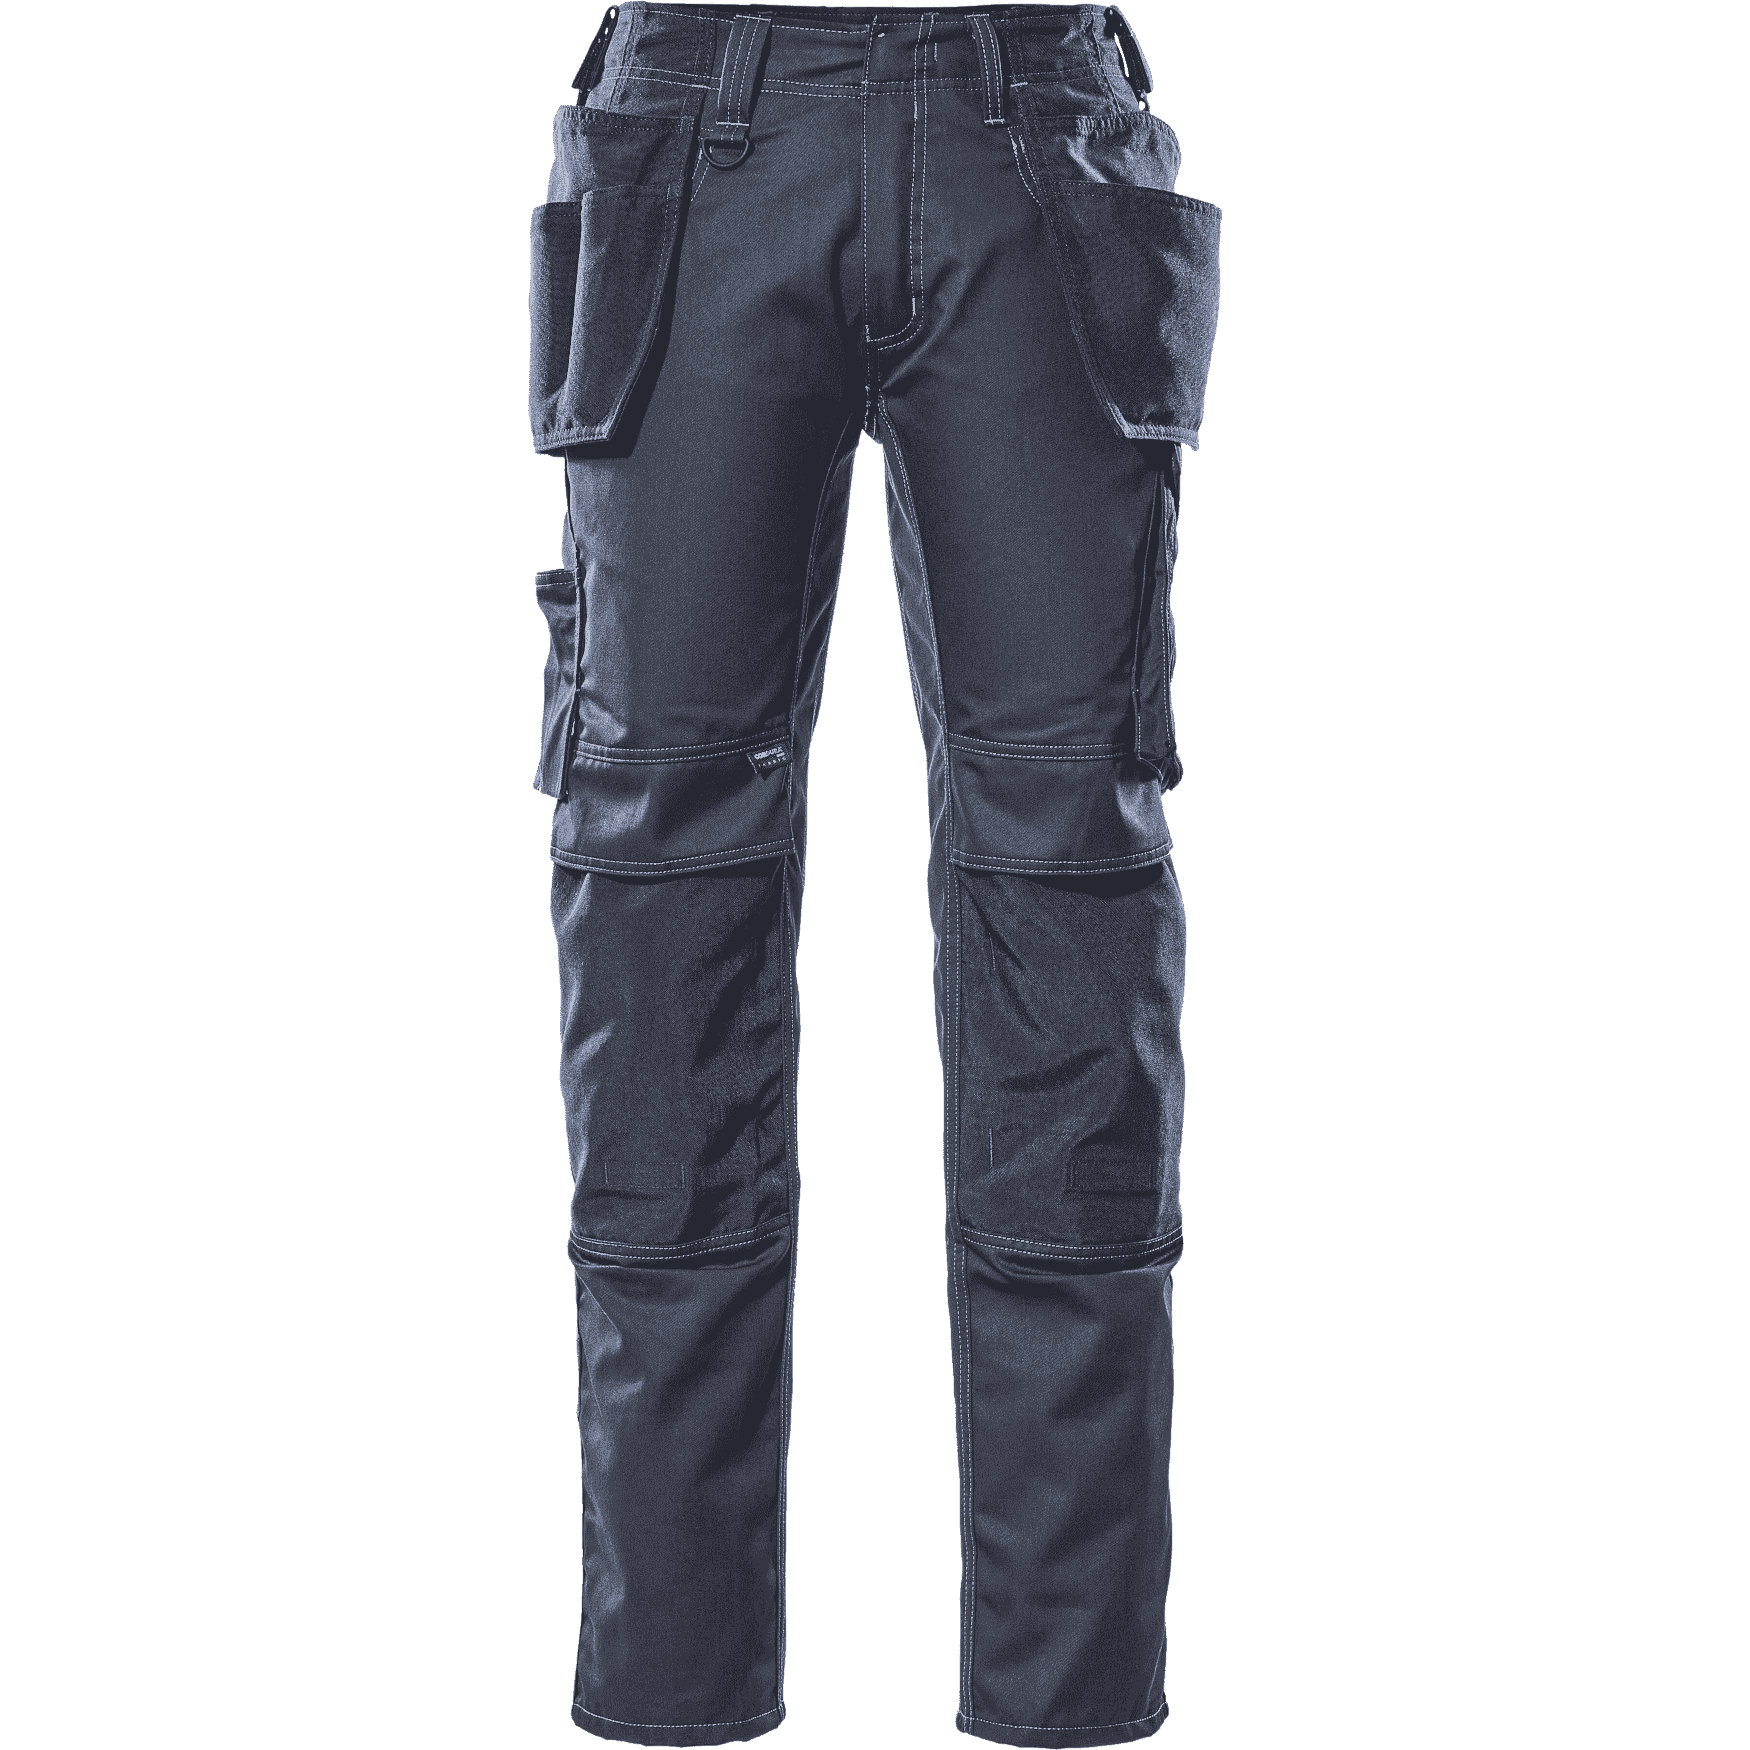 Work Trousers with Holster Pockets 17731-442 Dark Navy